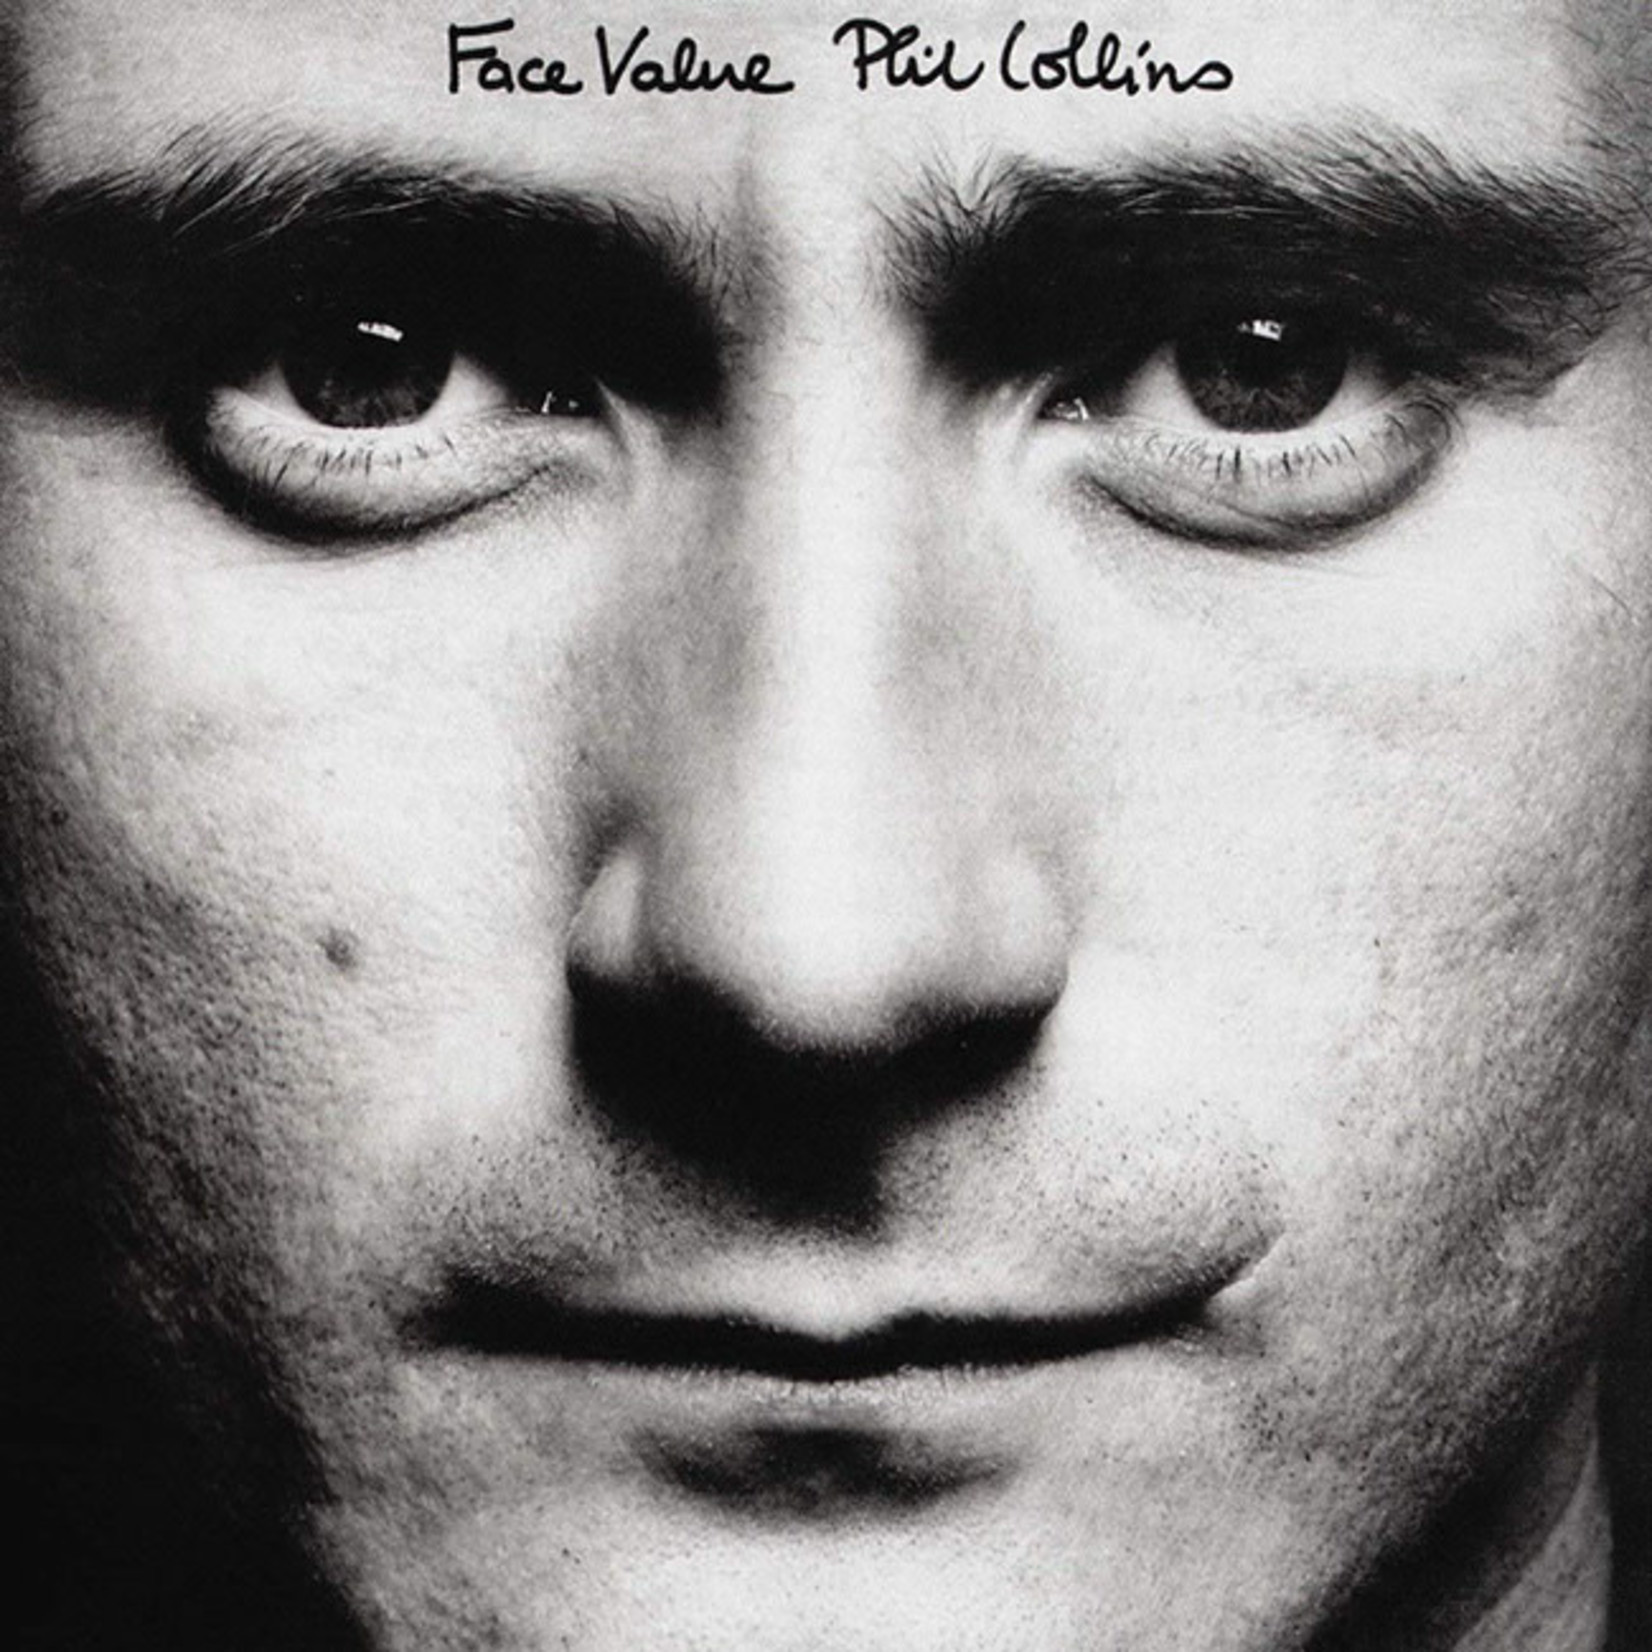 [New] Phil Collins - Face Value